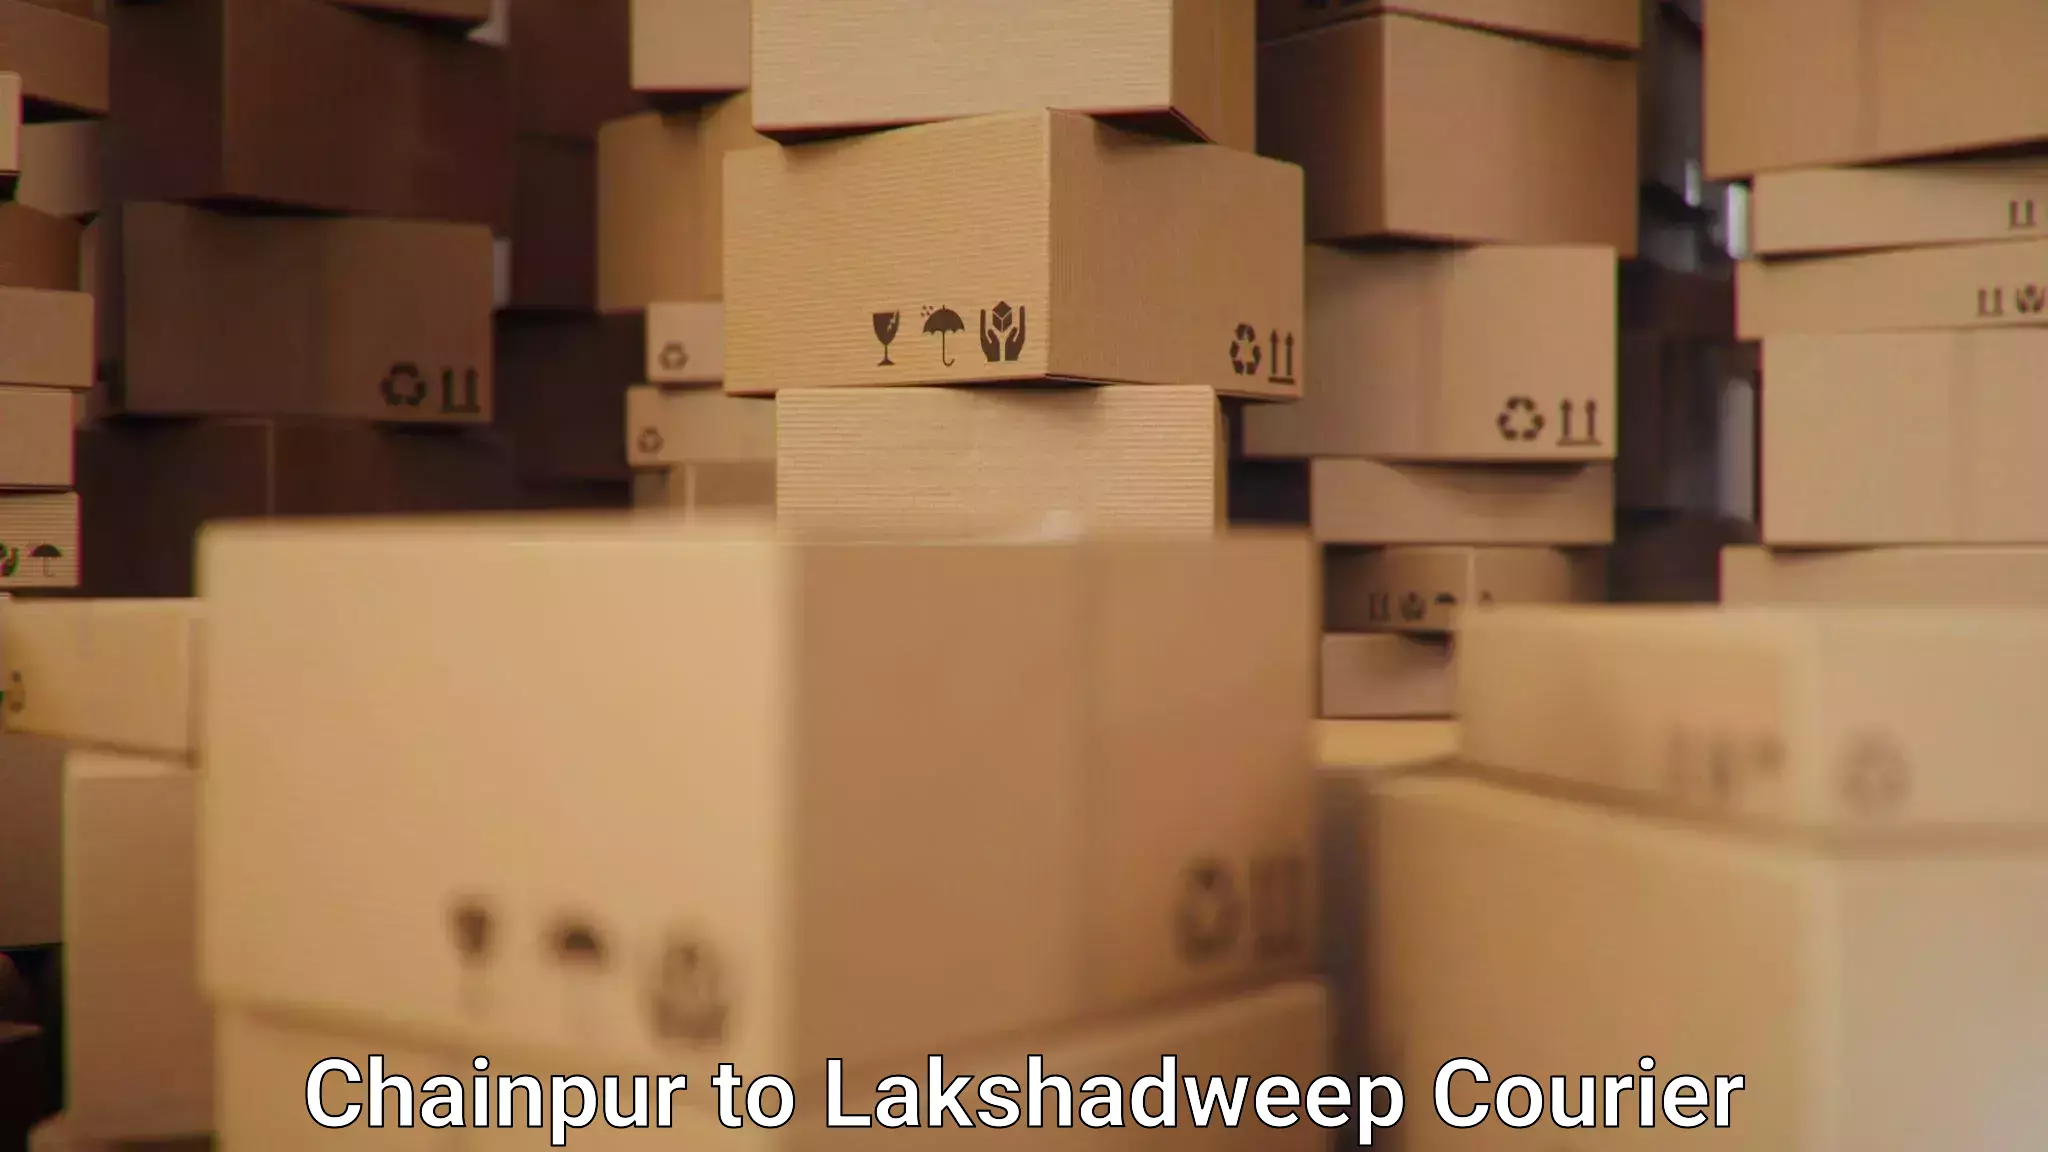 Multi-city courier Chainpur to Lakshadweep